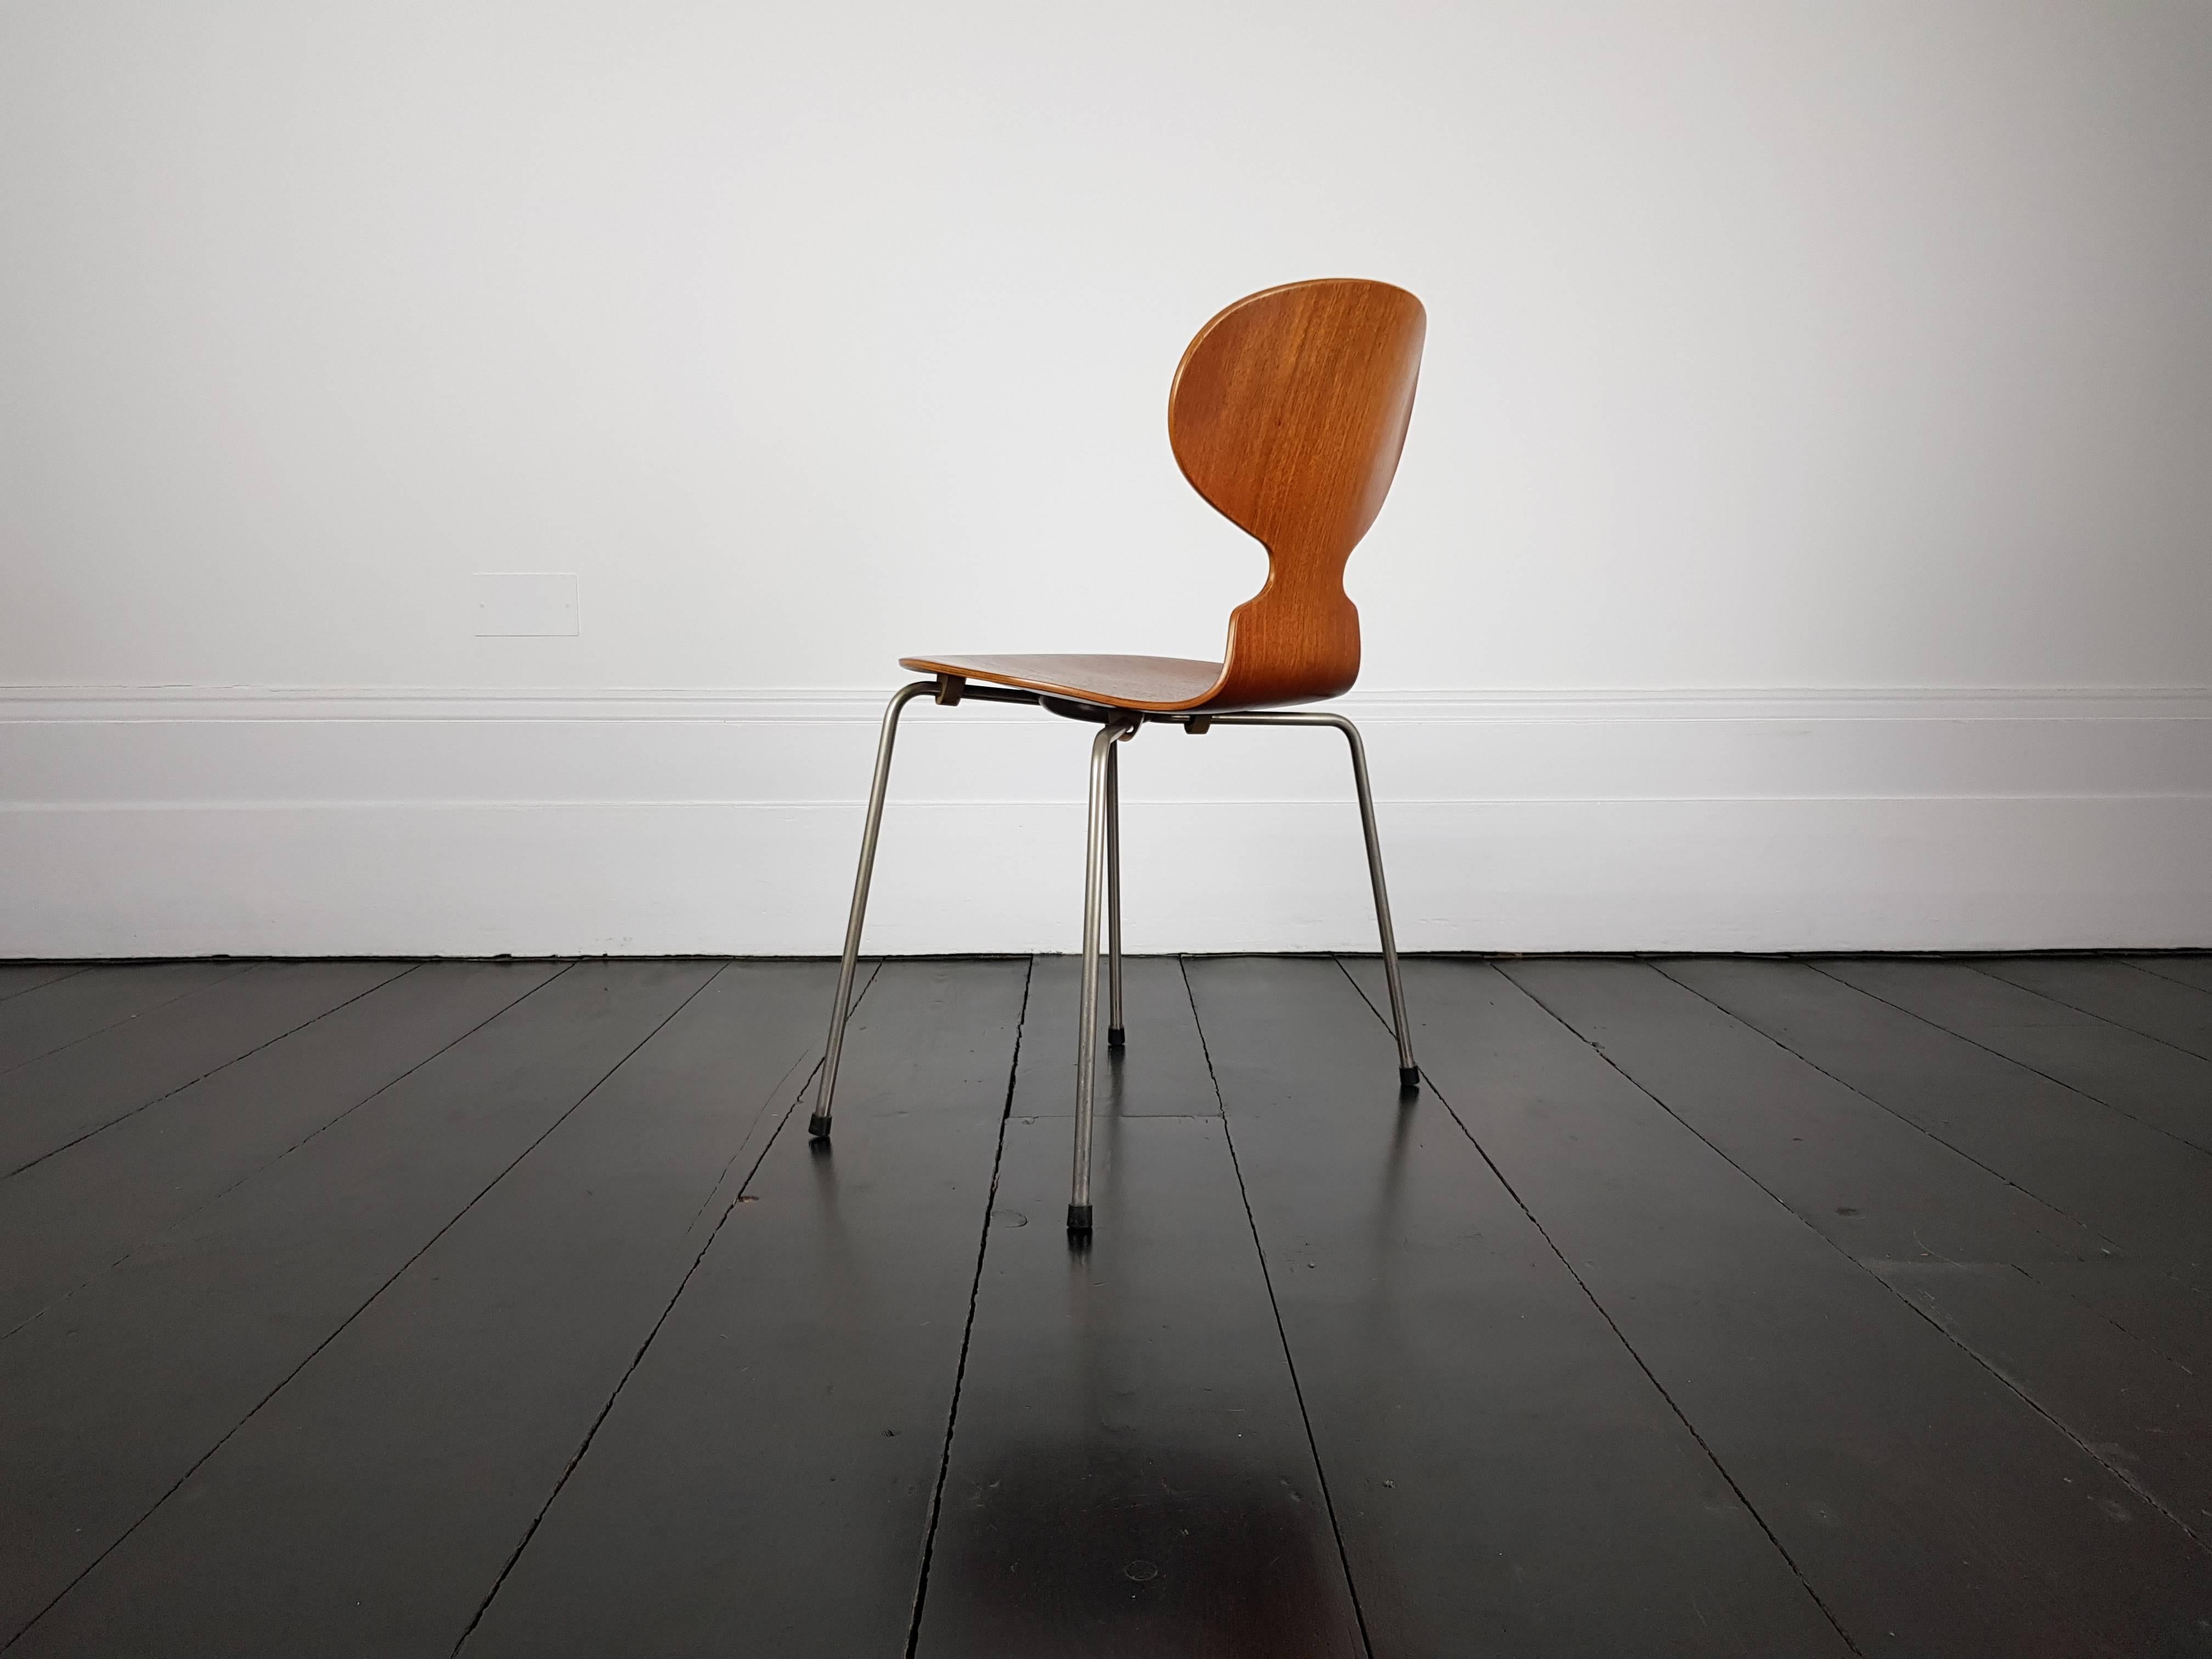 Iconic model 3100 'Ant' chair by Arne Jacobsen for Fritz Hansen.

Model 3100 'Ant' chairs were designed by Arne Jacobsen in 1952. Teak veneer on steel frame. This chair produced and stamped, 1969.

 